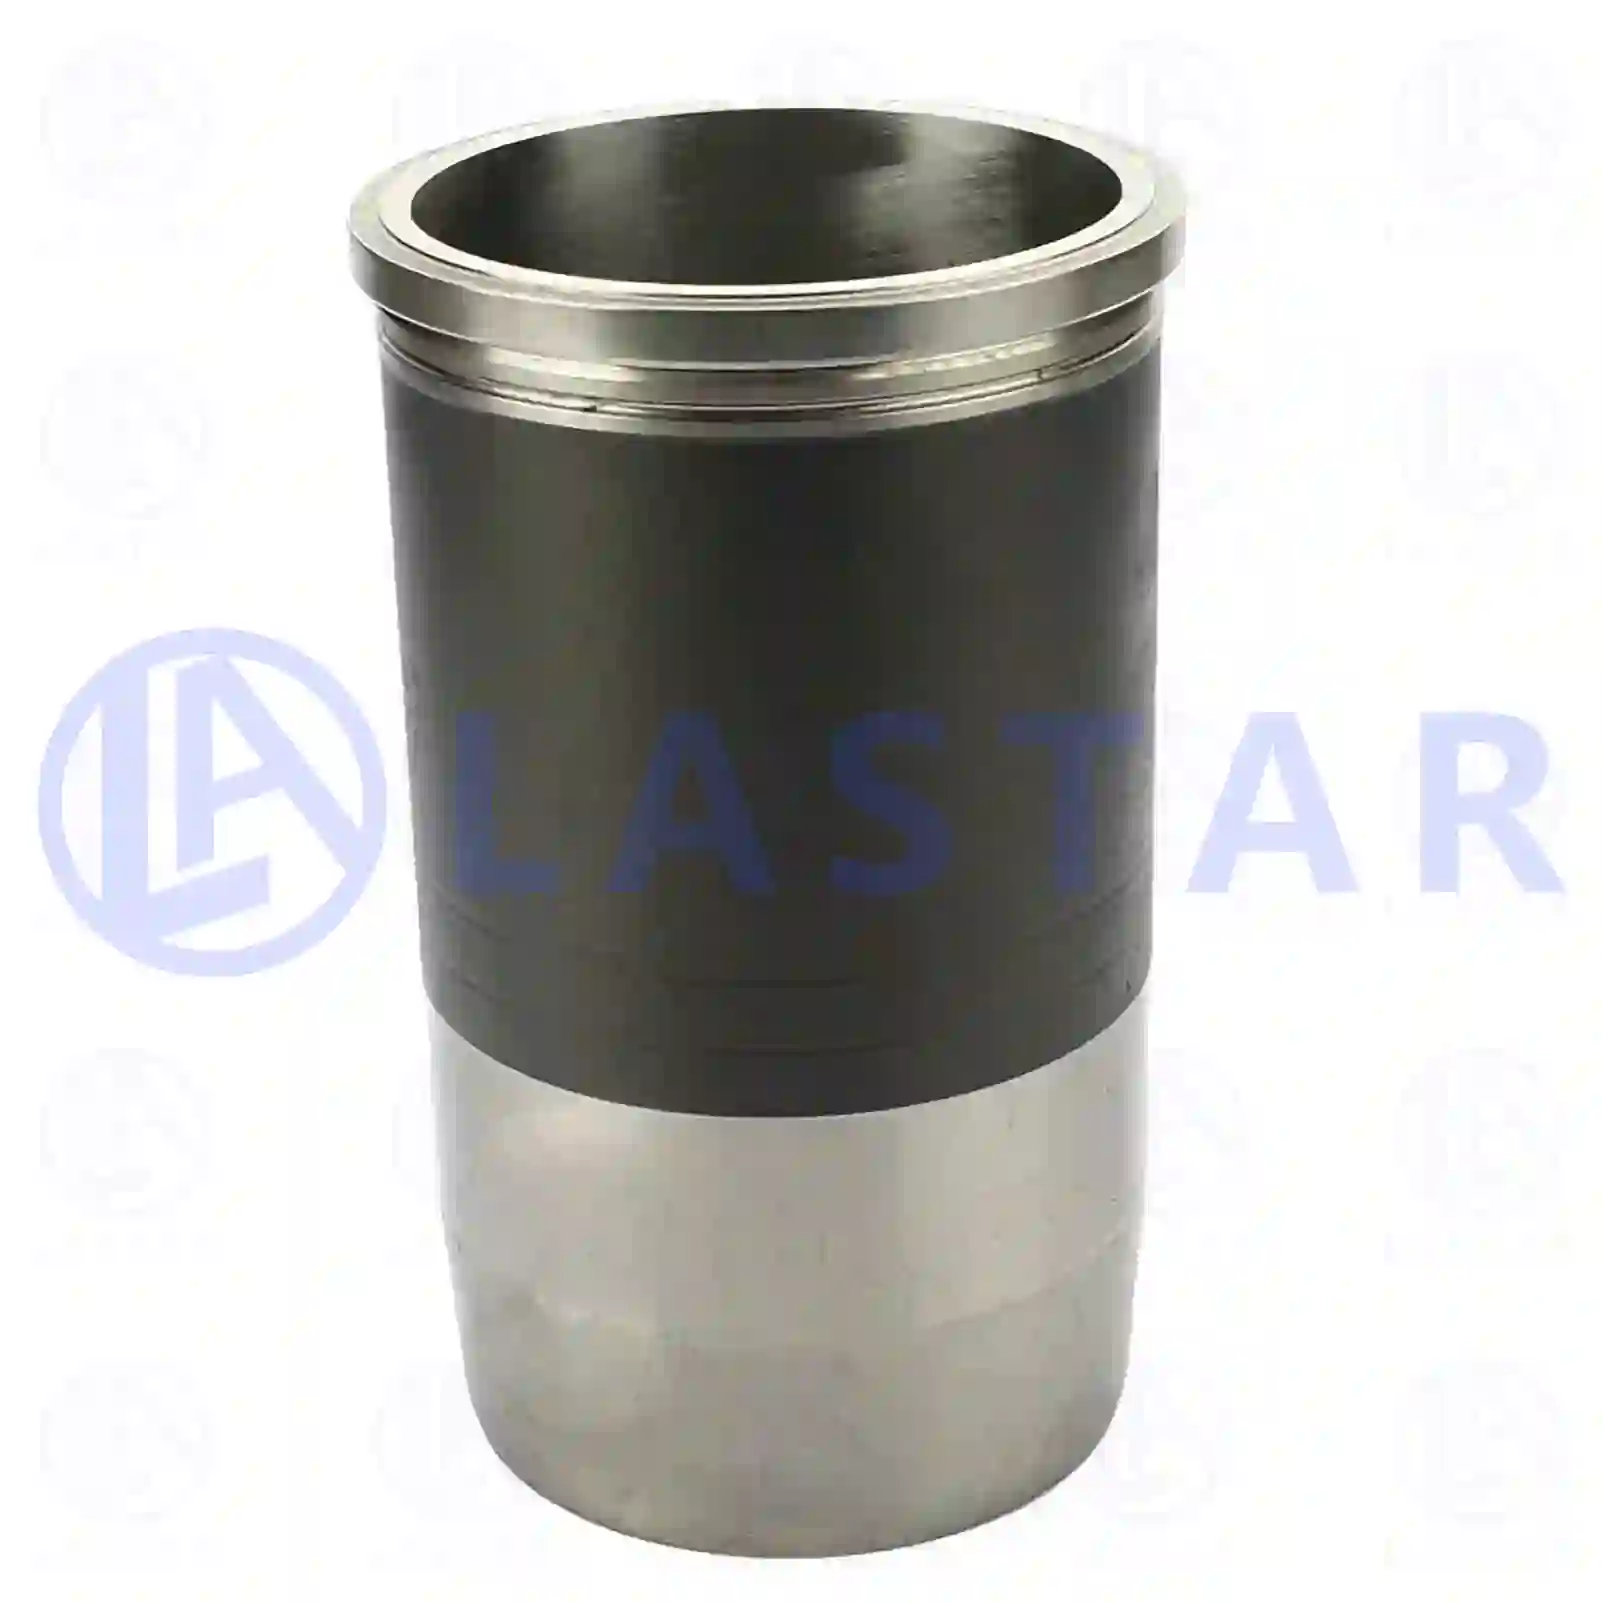  Cylinder liner, without seal rings || Lastar Spare Part | Truck Spare Parts, Auotomotive Spare Parts